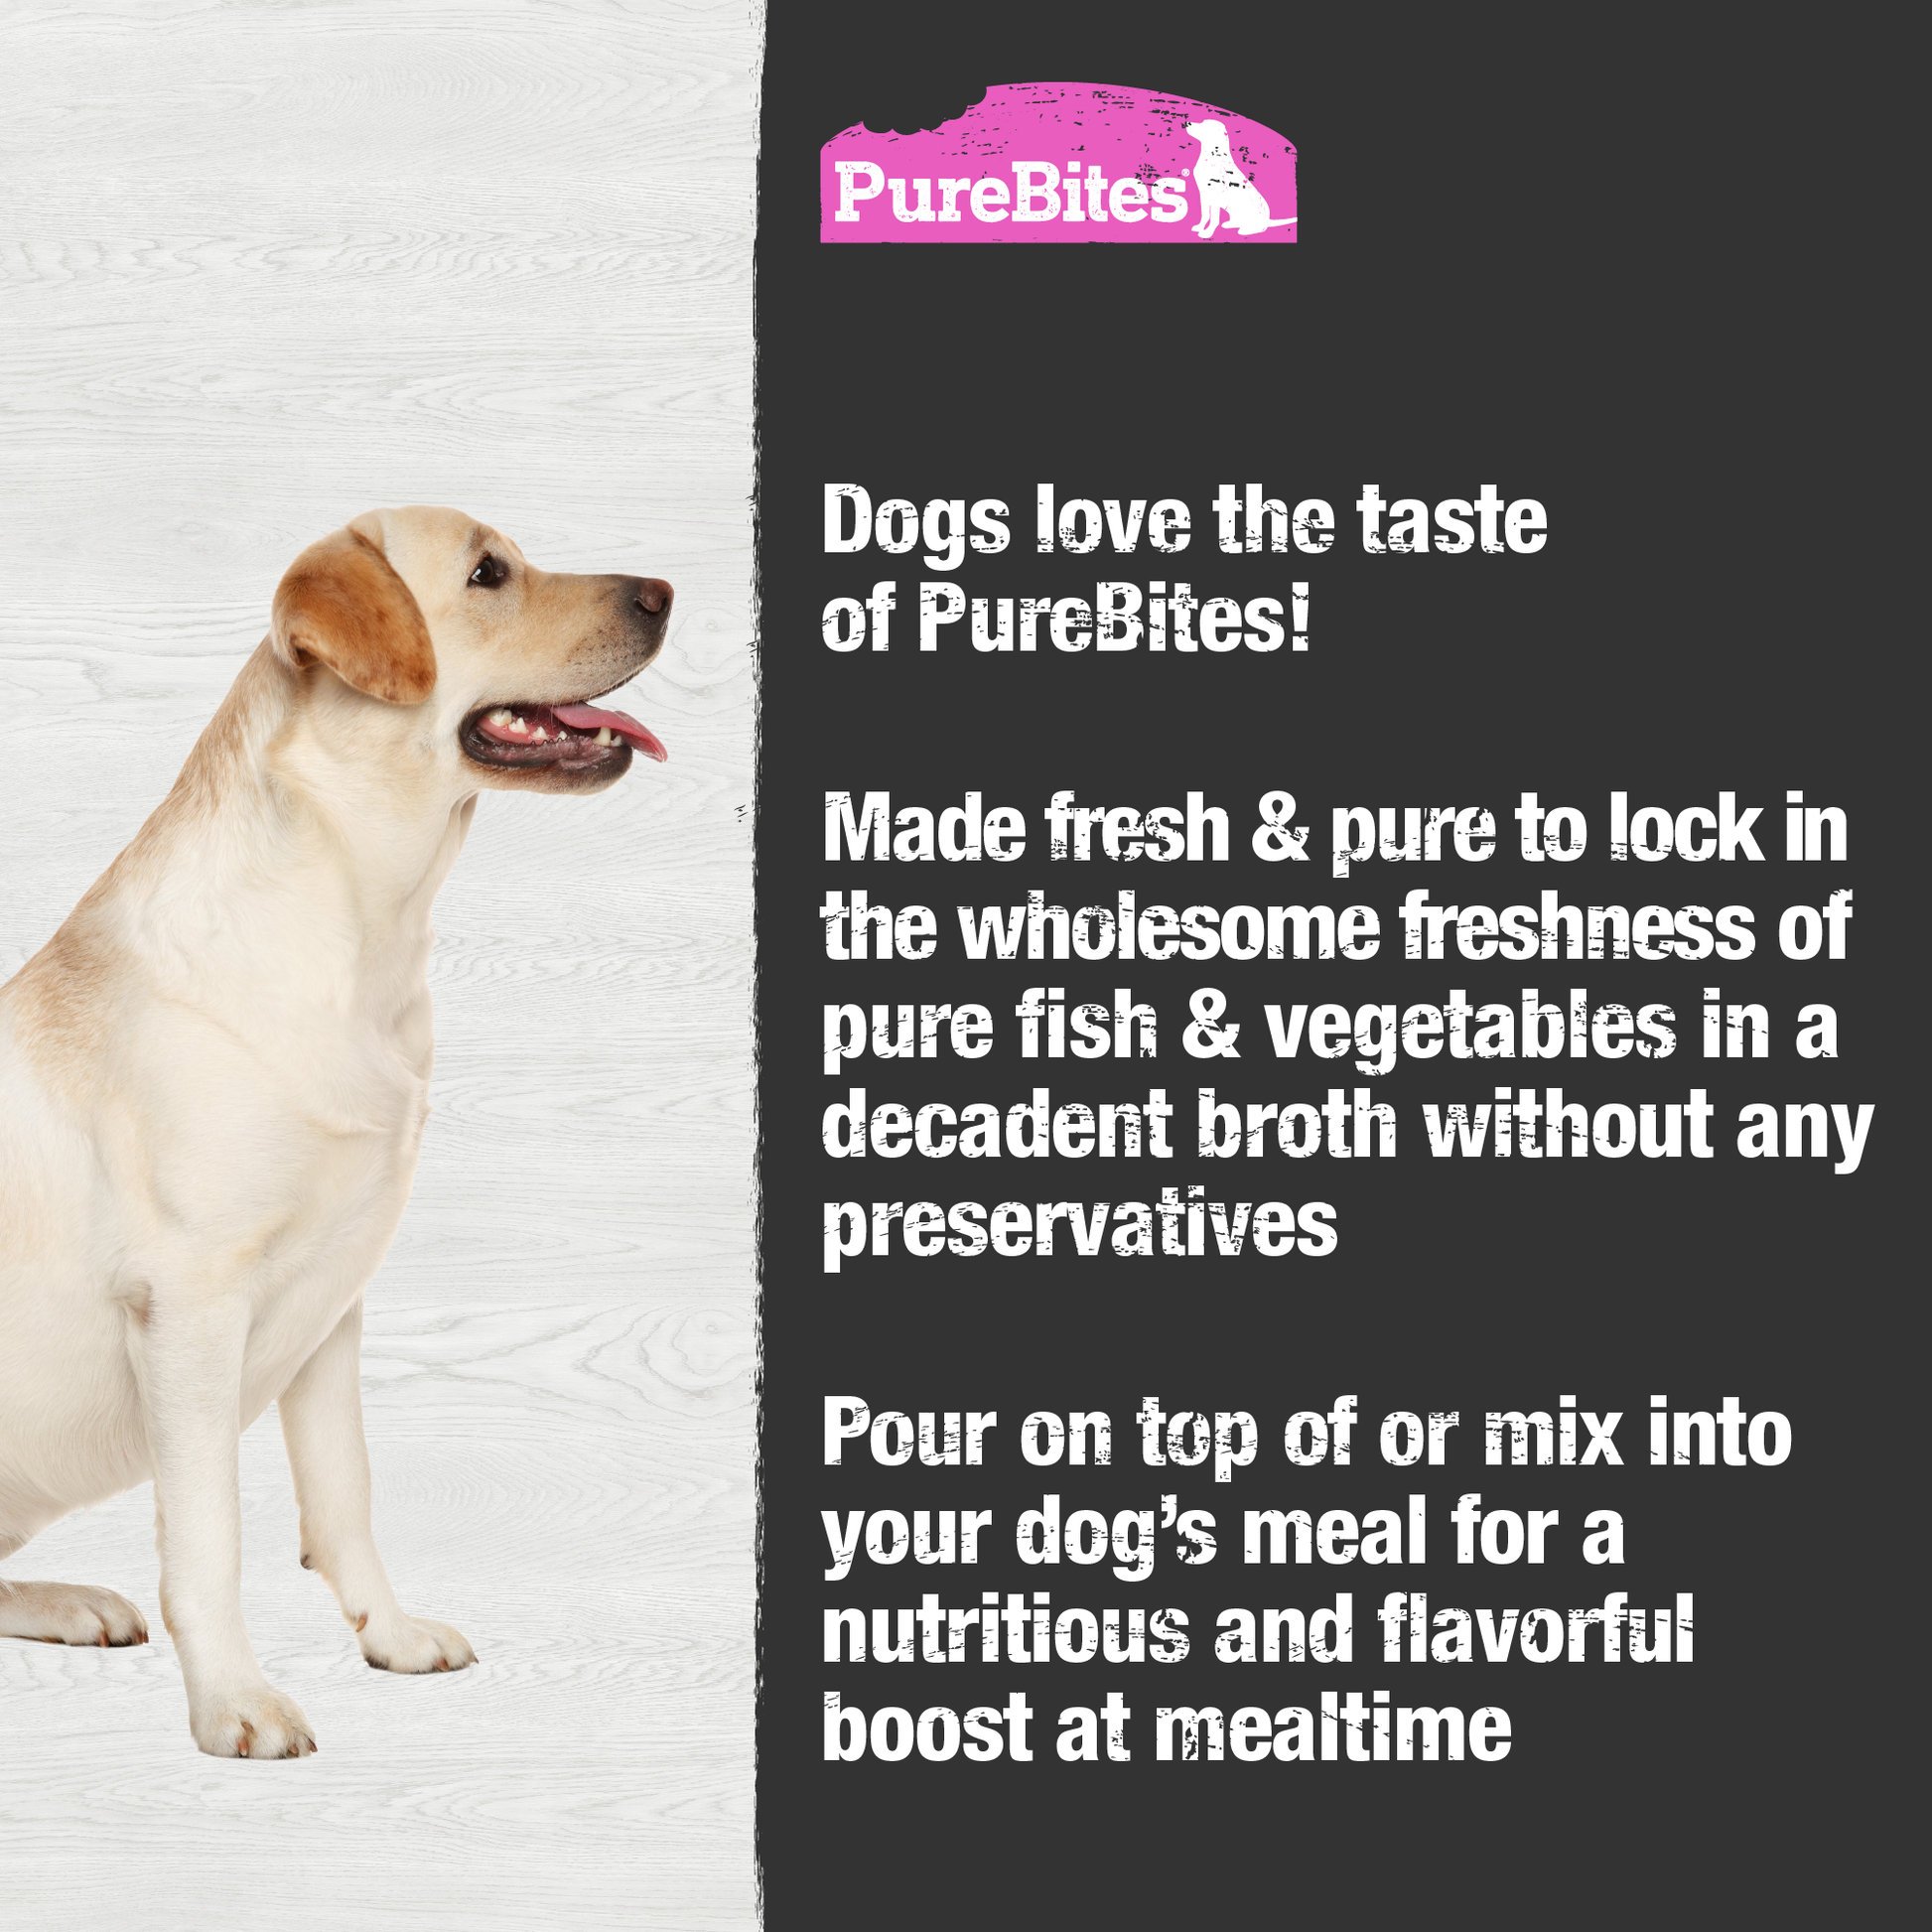 Made fresh & pure means more protein and nutrients packed into every pouch. With only tuna, salmon, and vegetables in a rich broth, it provides superior nutrition and mirrors a dog's ancestral diet.